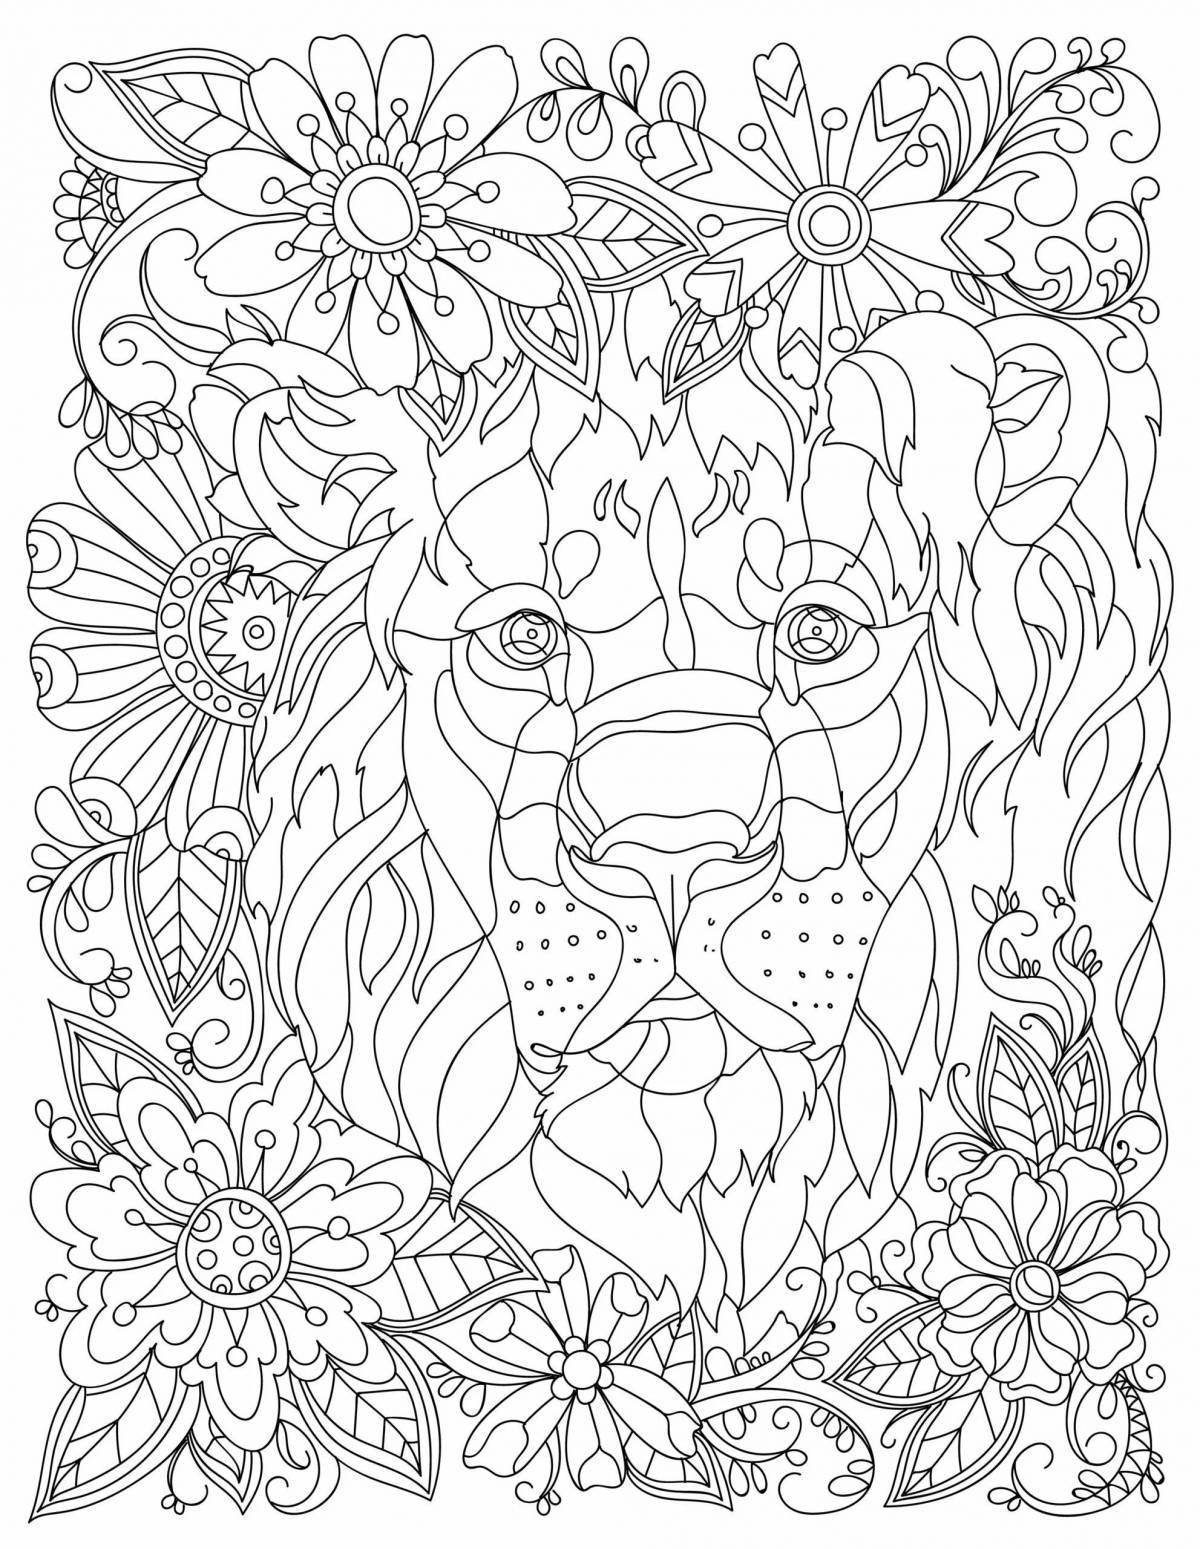 Serene coloring by number for adults en antistress